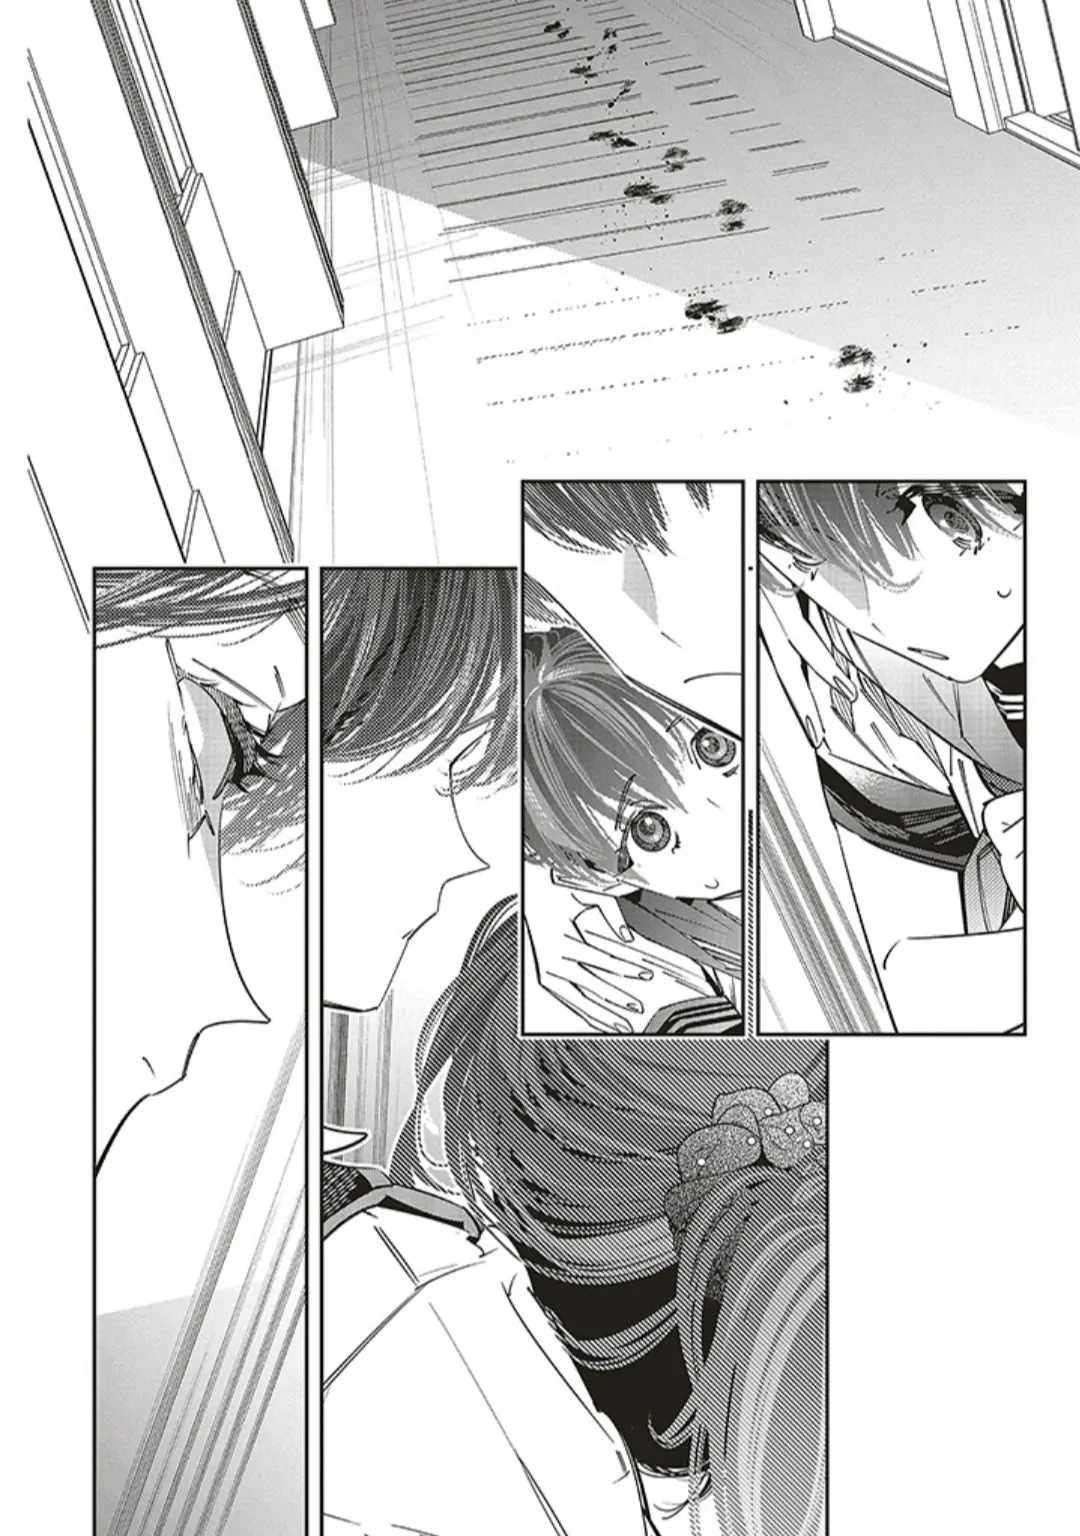 I Reincarnated As The Little Sister Of A Death Game Manga’S Murd3R Mastermind And Failed - chapter 18 - #4